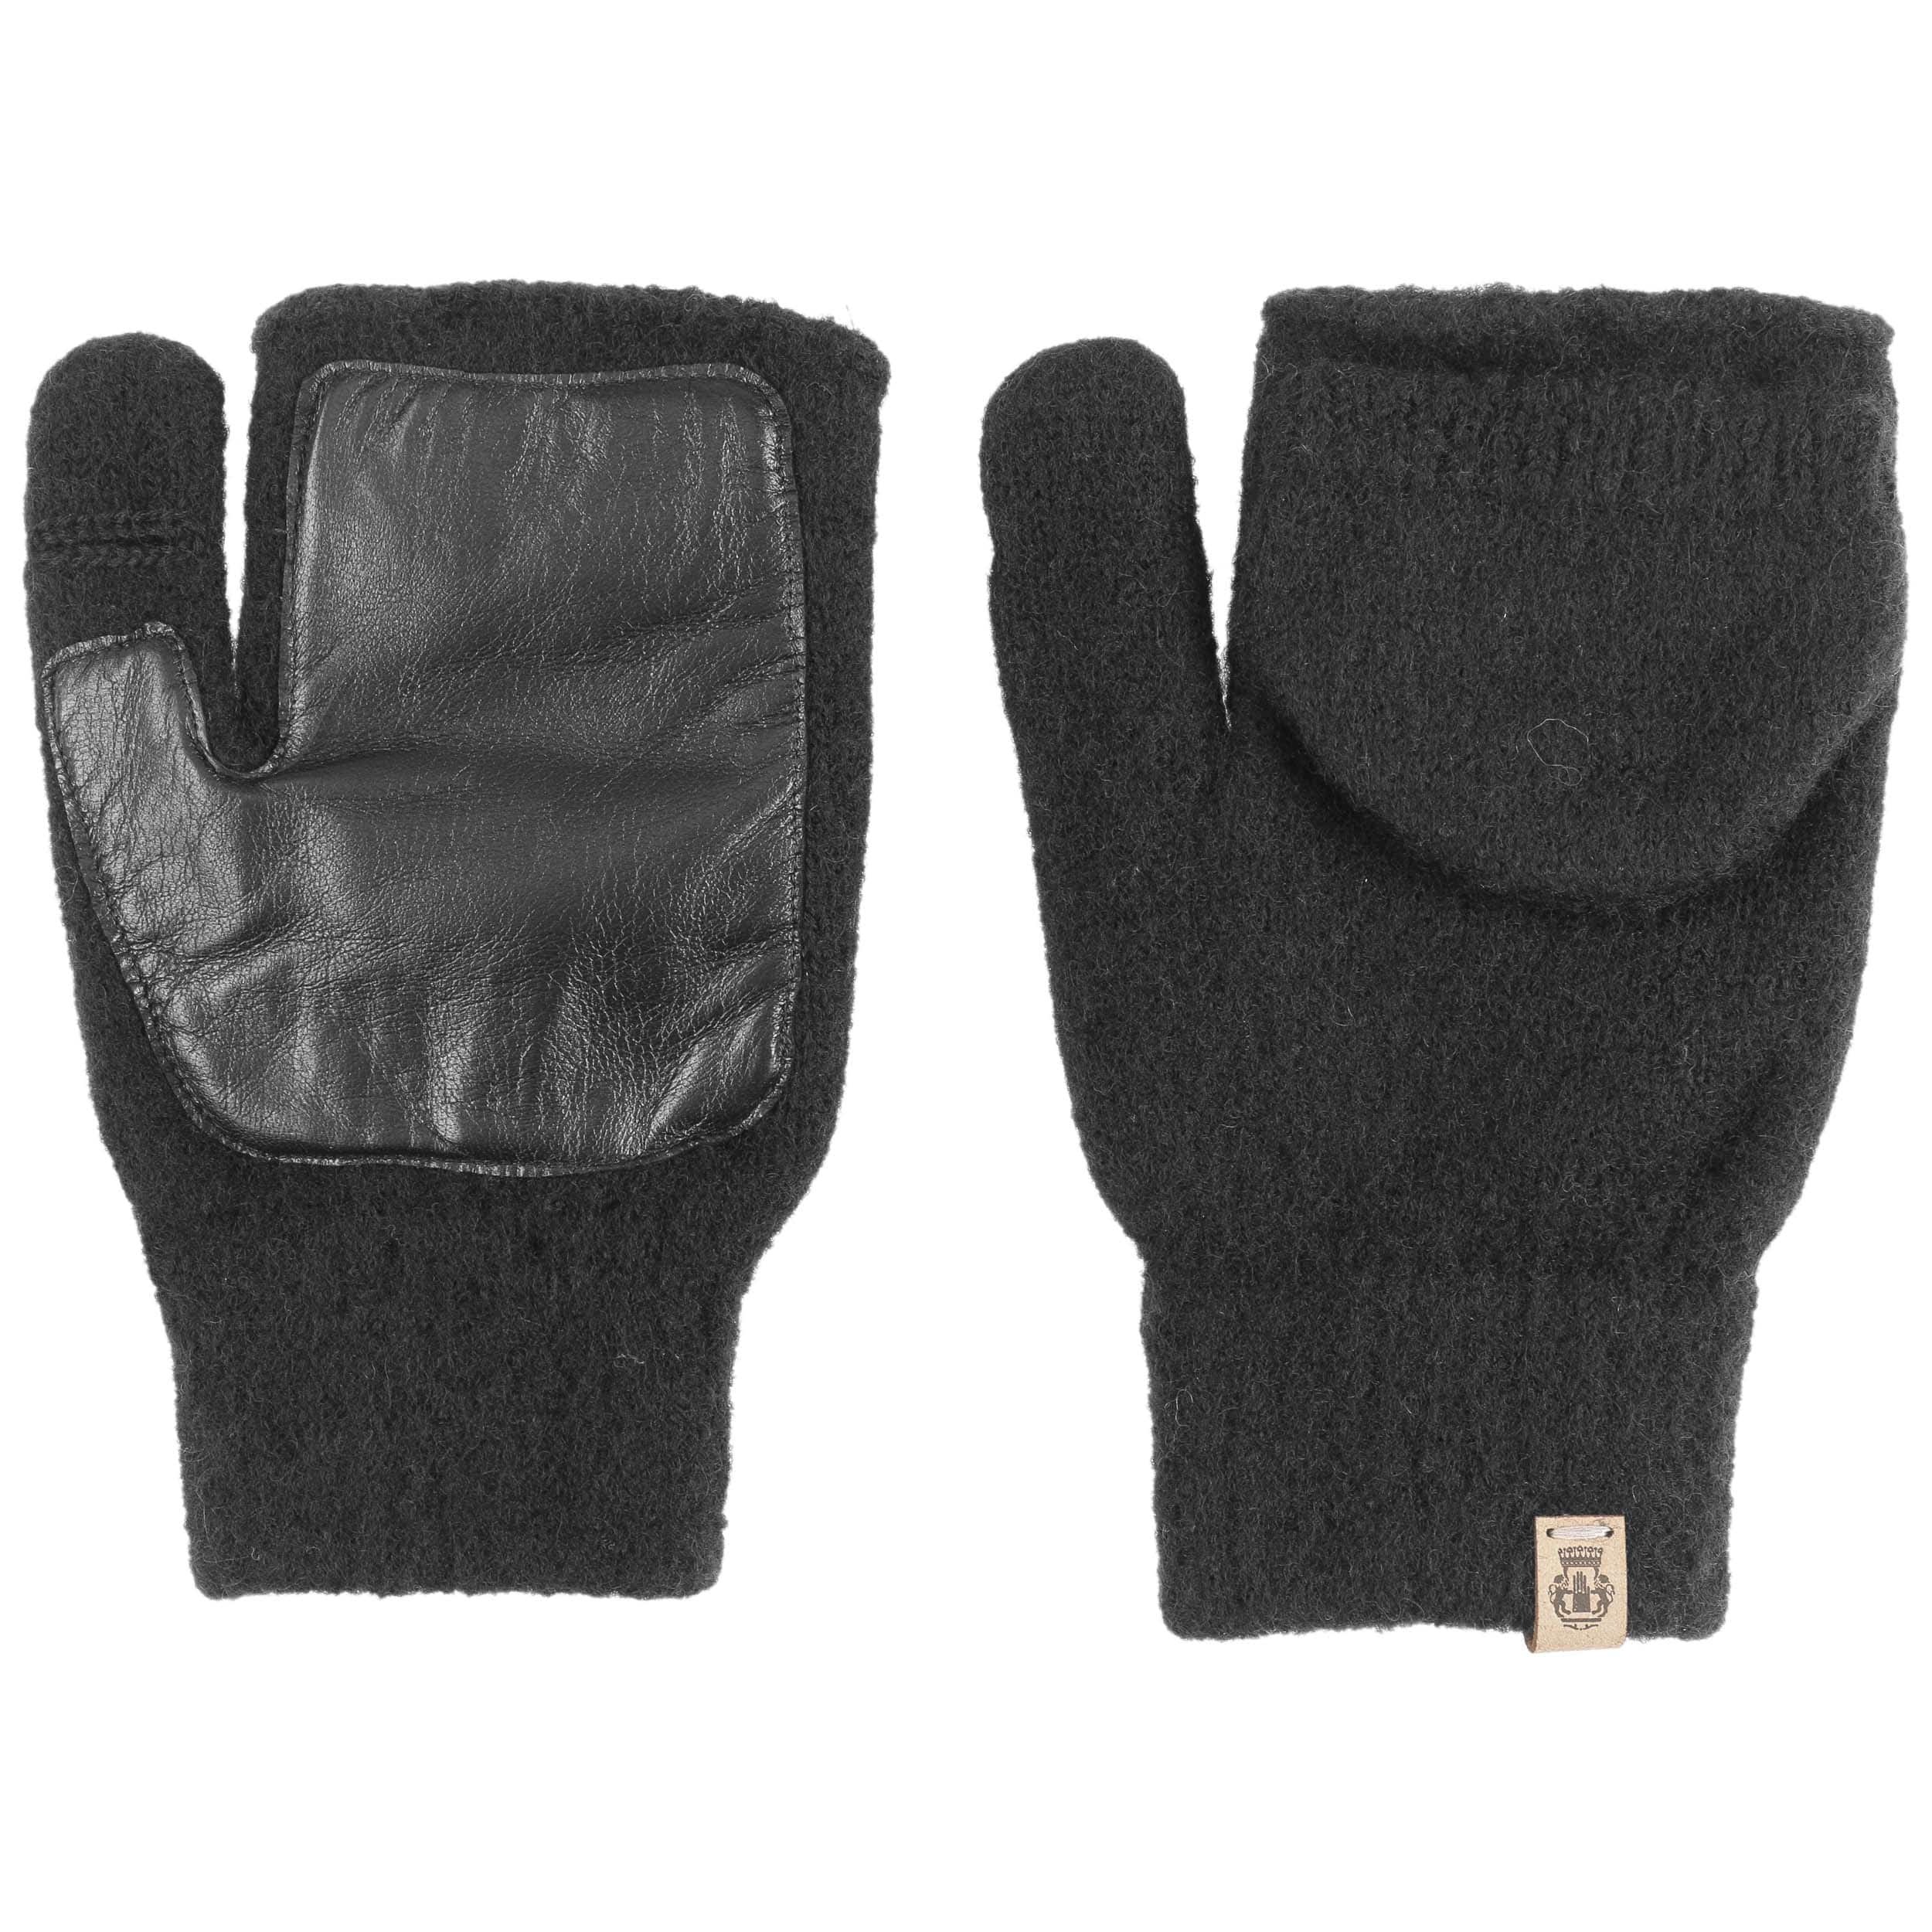 Milled Wool Hooded Gloves Women by Roeckl - 62,95